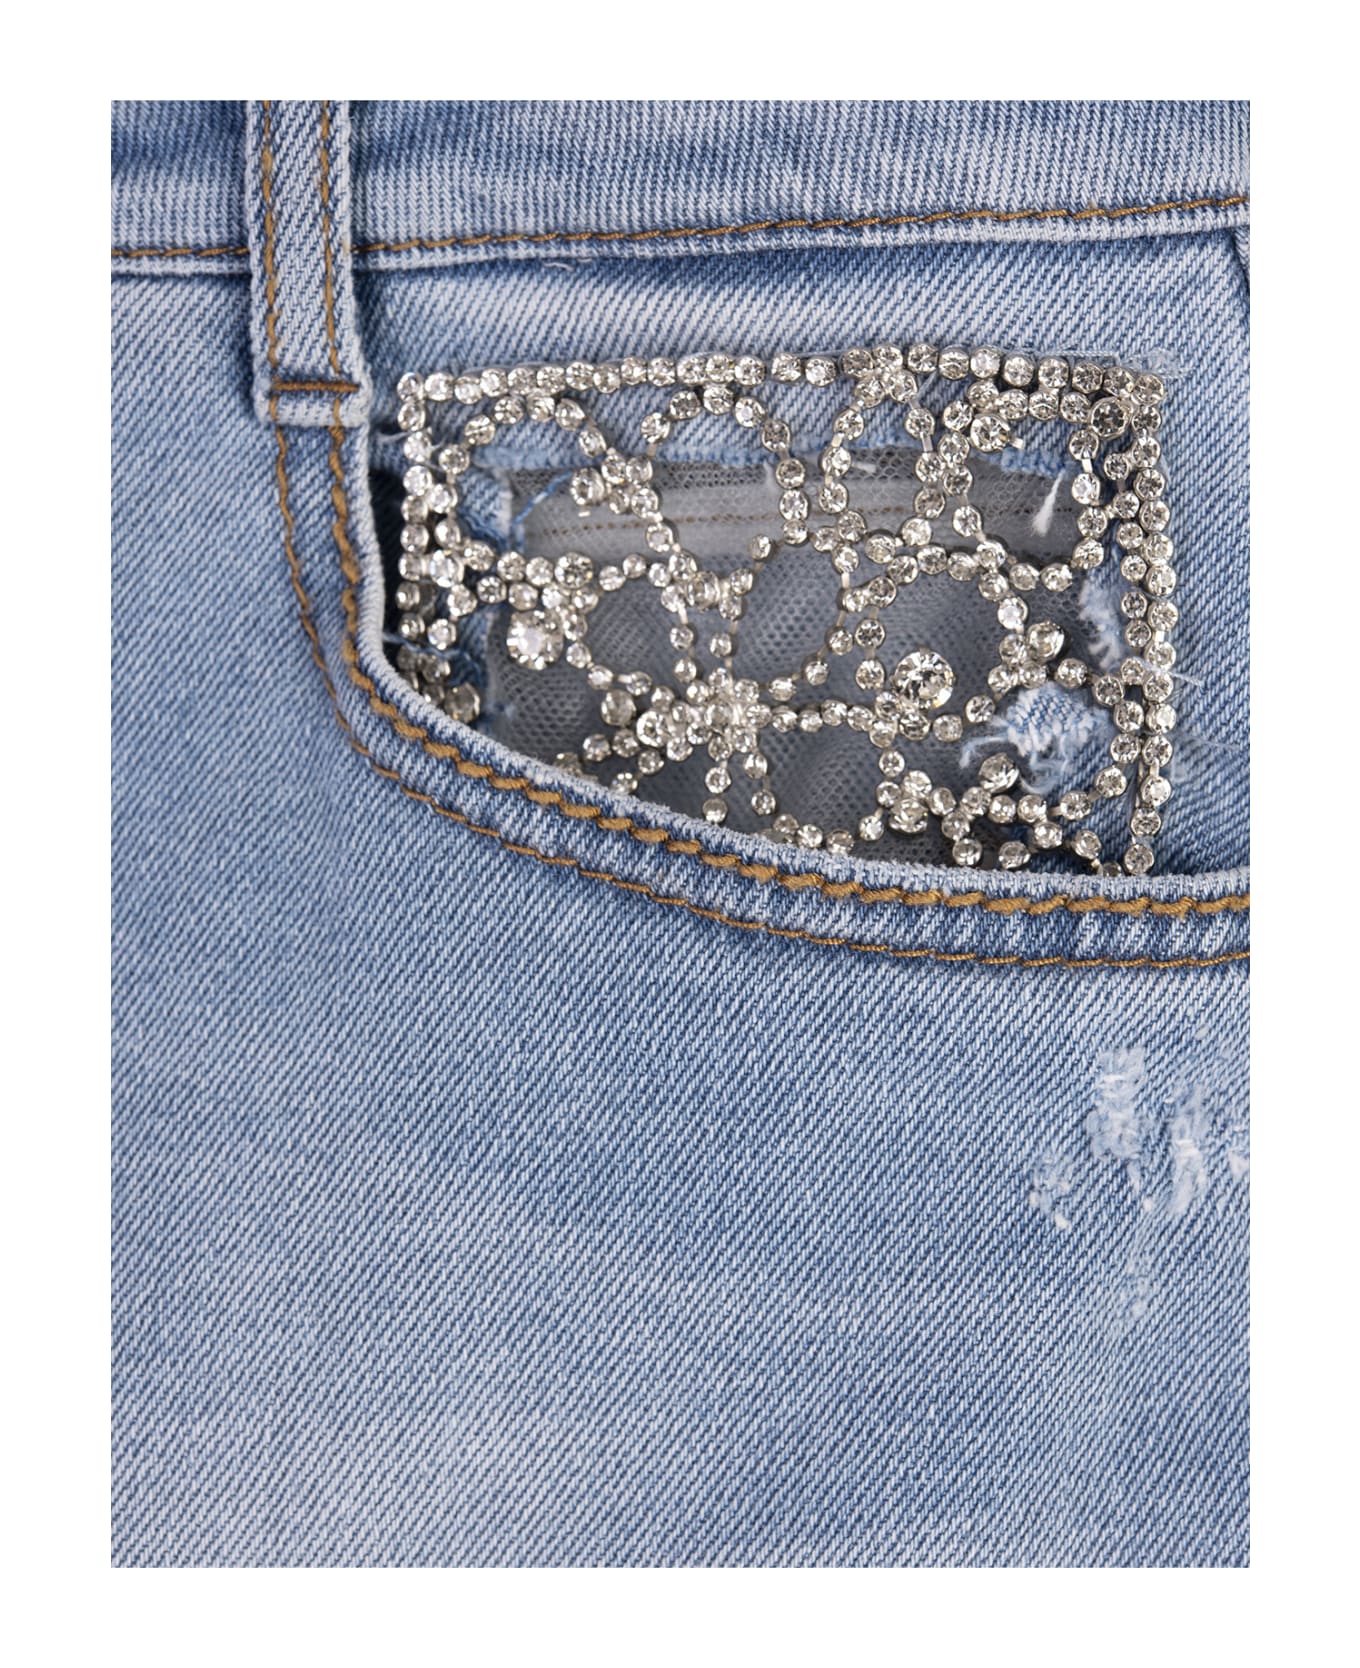 Ermanno Scervino Mid Blue Denim Shorts With Jewel Embroidery - Blue